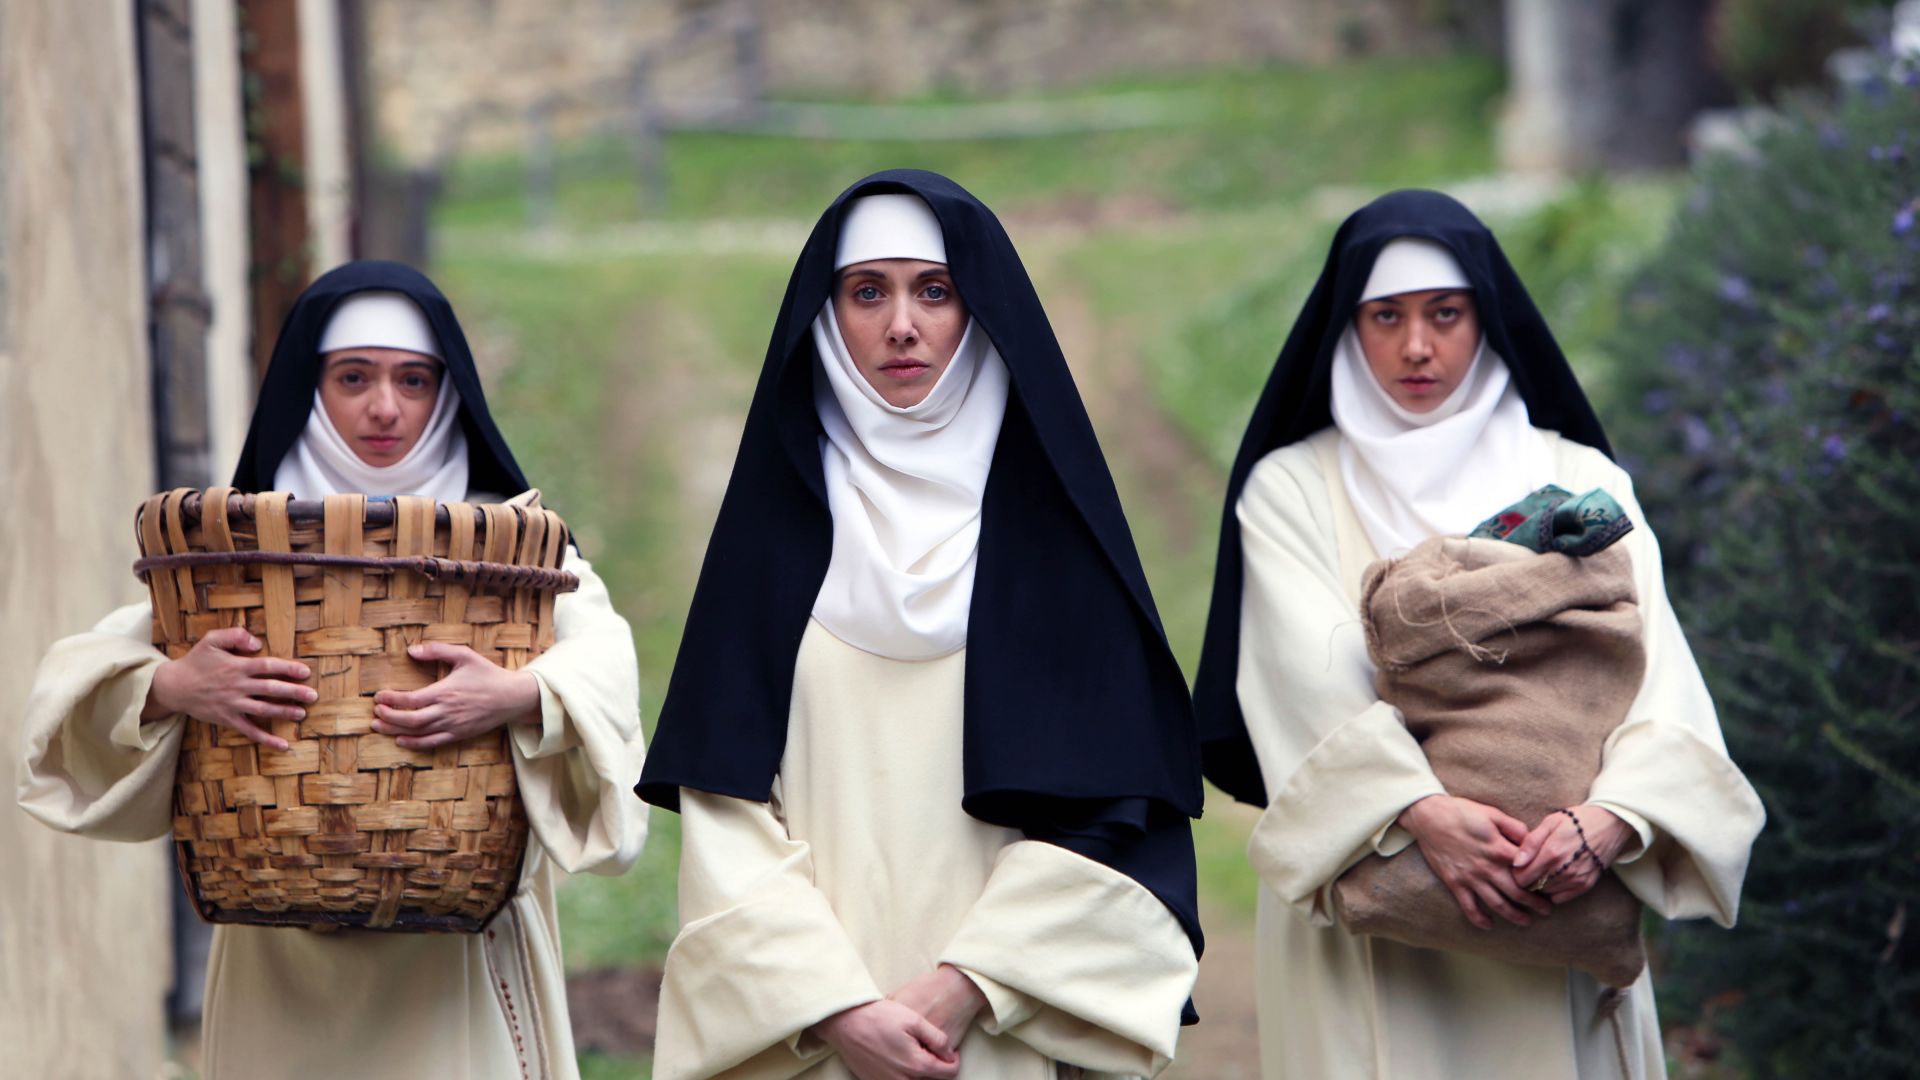 The Little Hours, Alison Brie, 4k (horizontal)